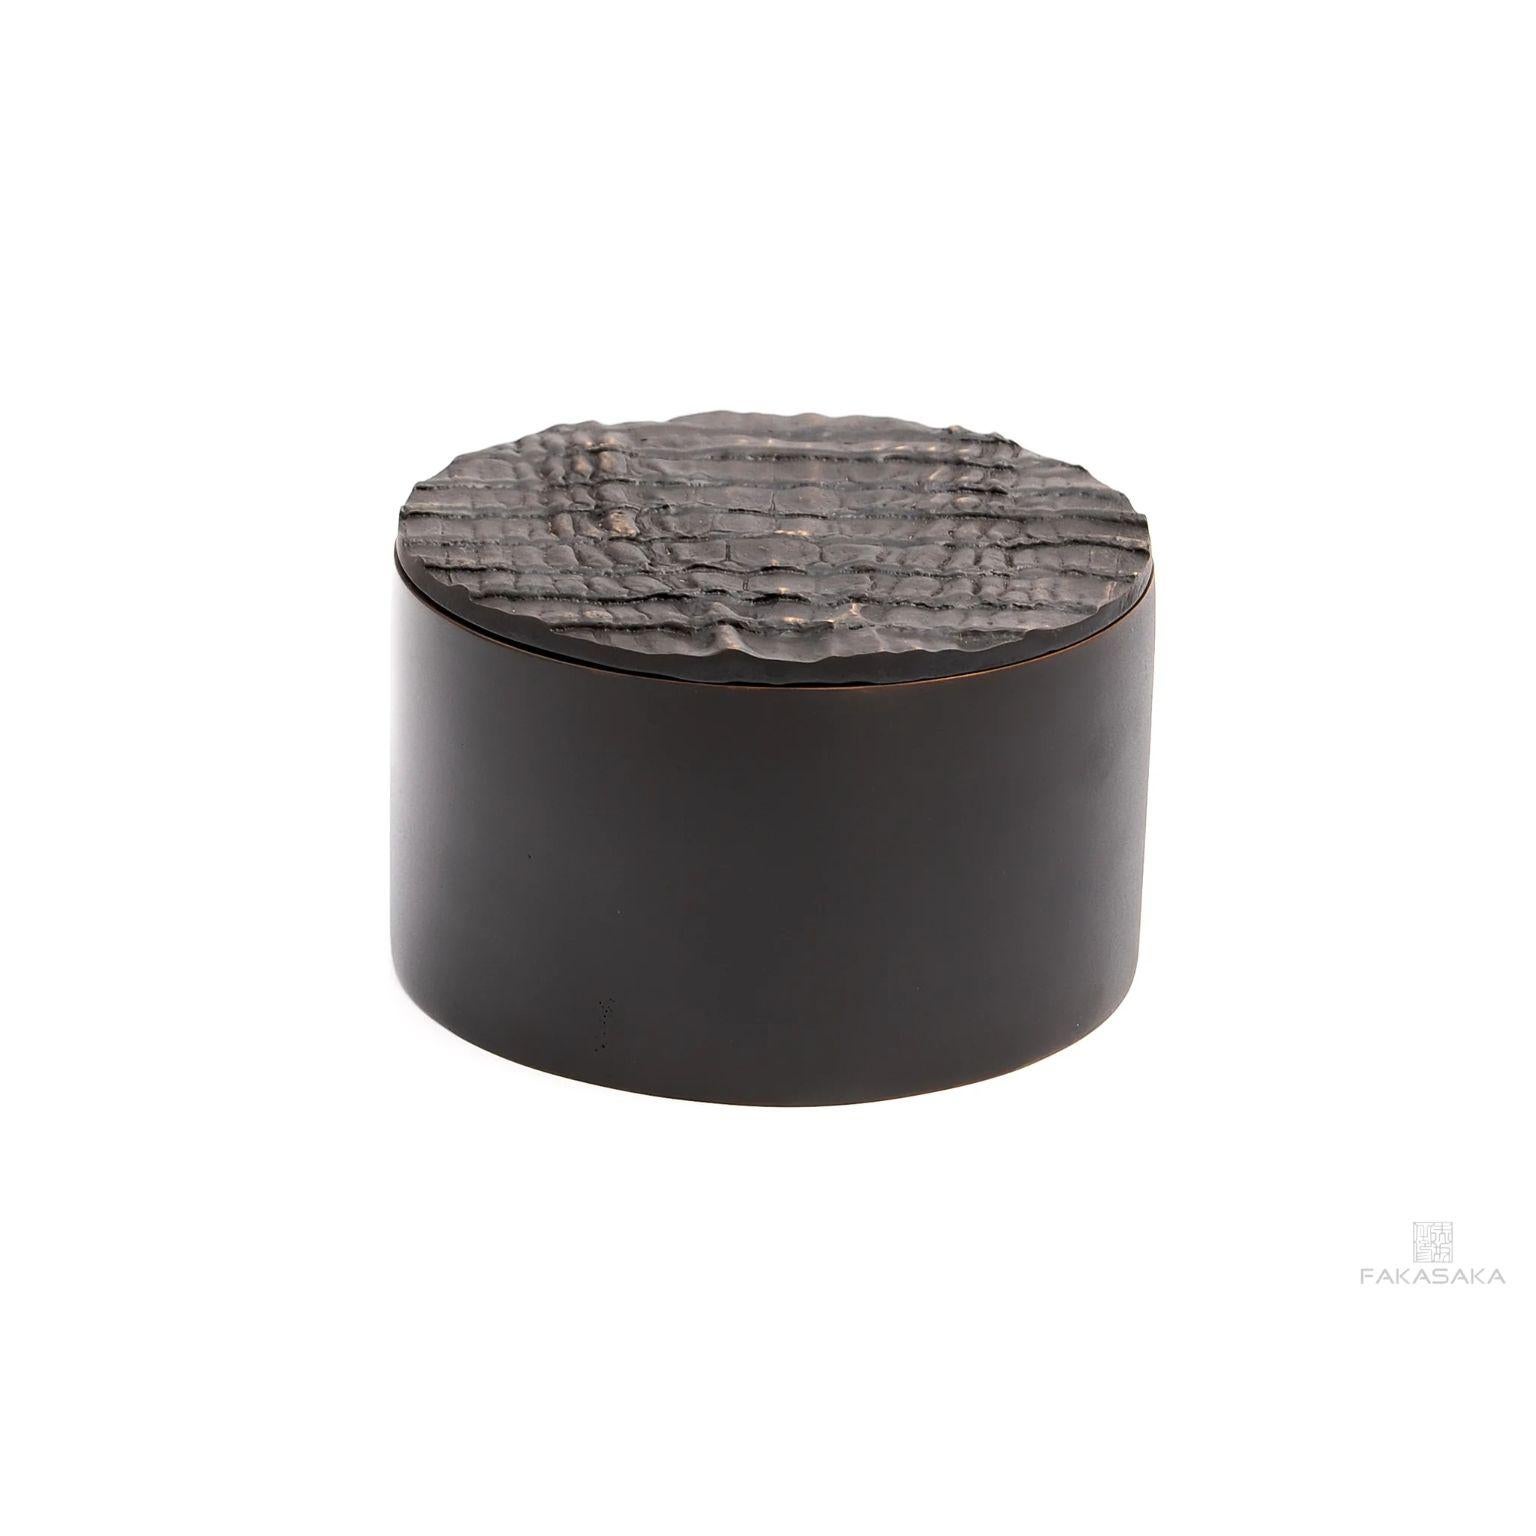 Aretha box by Fakasaka Design
Dimensions: W 15 cm D 15 cm H 9.5 cm.
Materials: black/brown bronze.
Also available in polished bronze.

 FAKASAKA is a design company focused on production of high-end furniture, lighting, decorative objects, jewels,